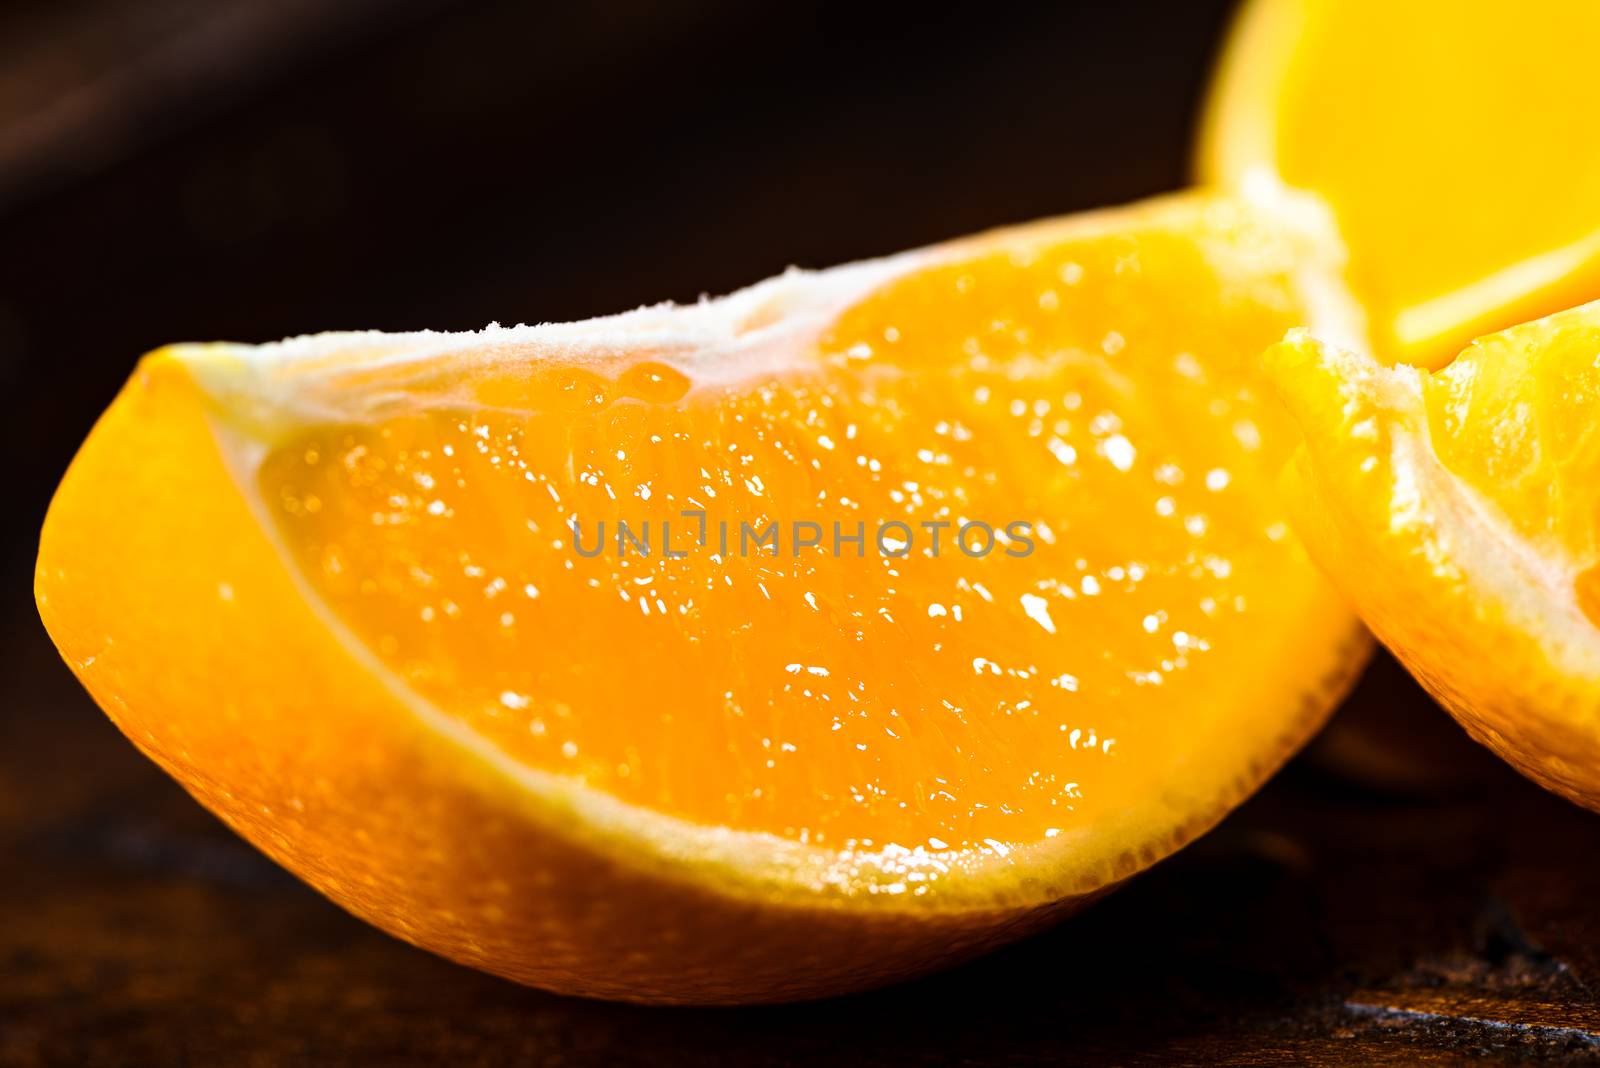 Sliced close up oranges on dark background with selective focus